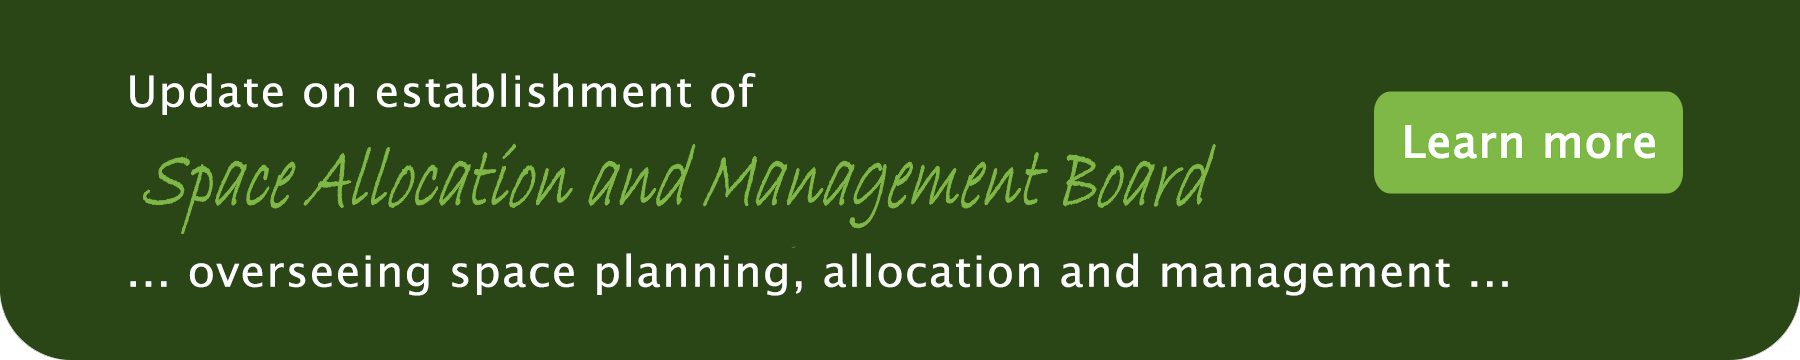 Circular about the establishment of Space Allocation and Management Board 